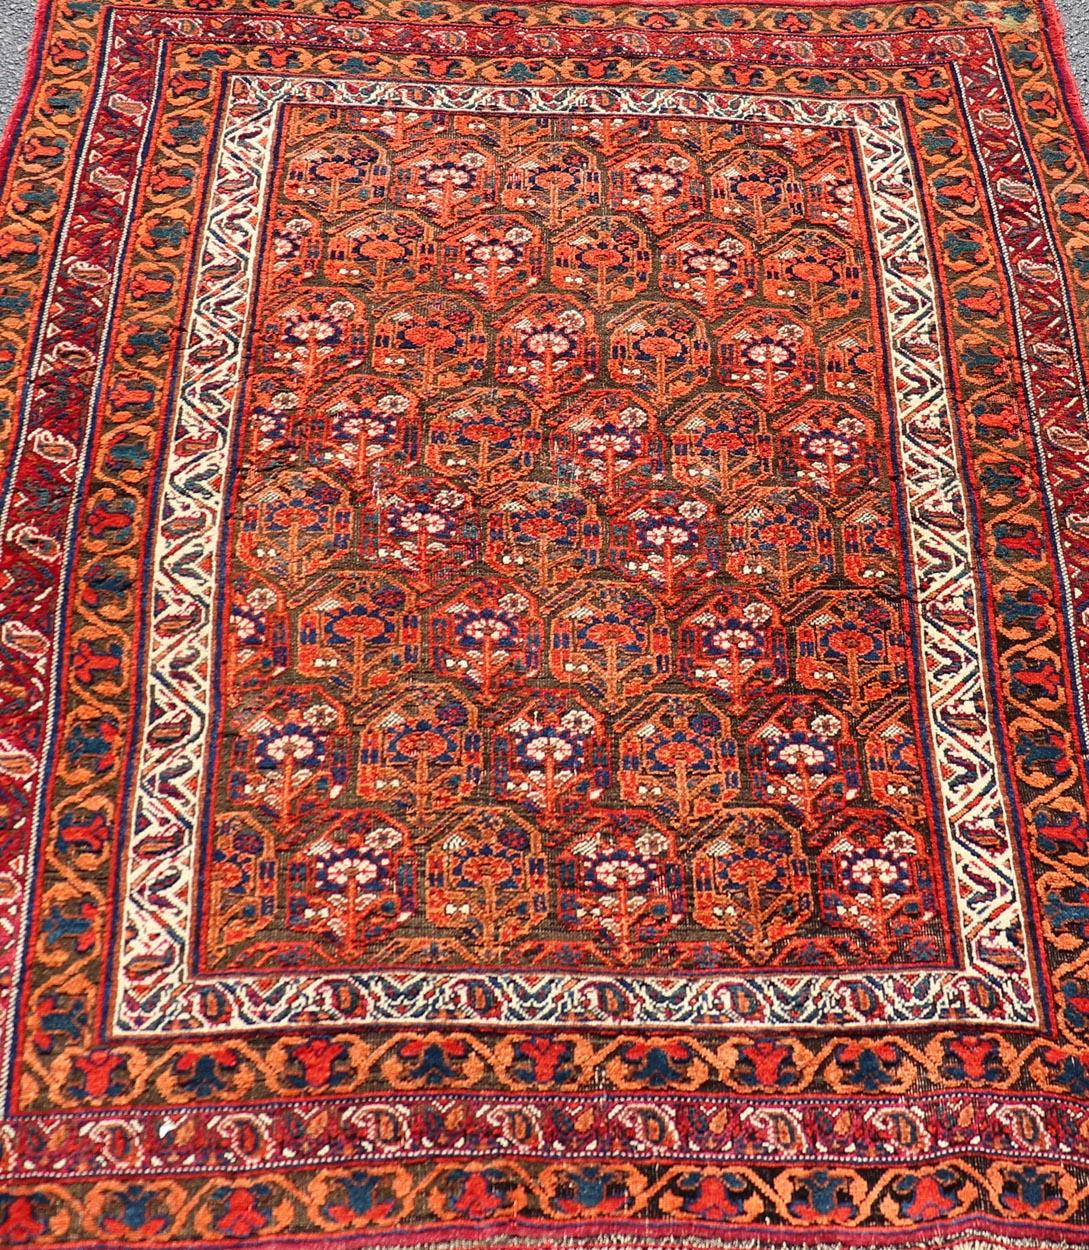  Fine Persian Antique Afshar Rug in Orange and Copper Background & Multi Colors For Sale 5